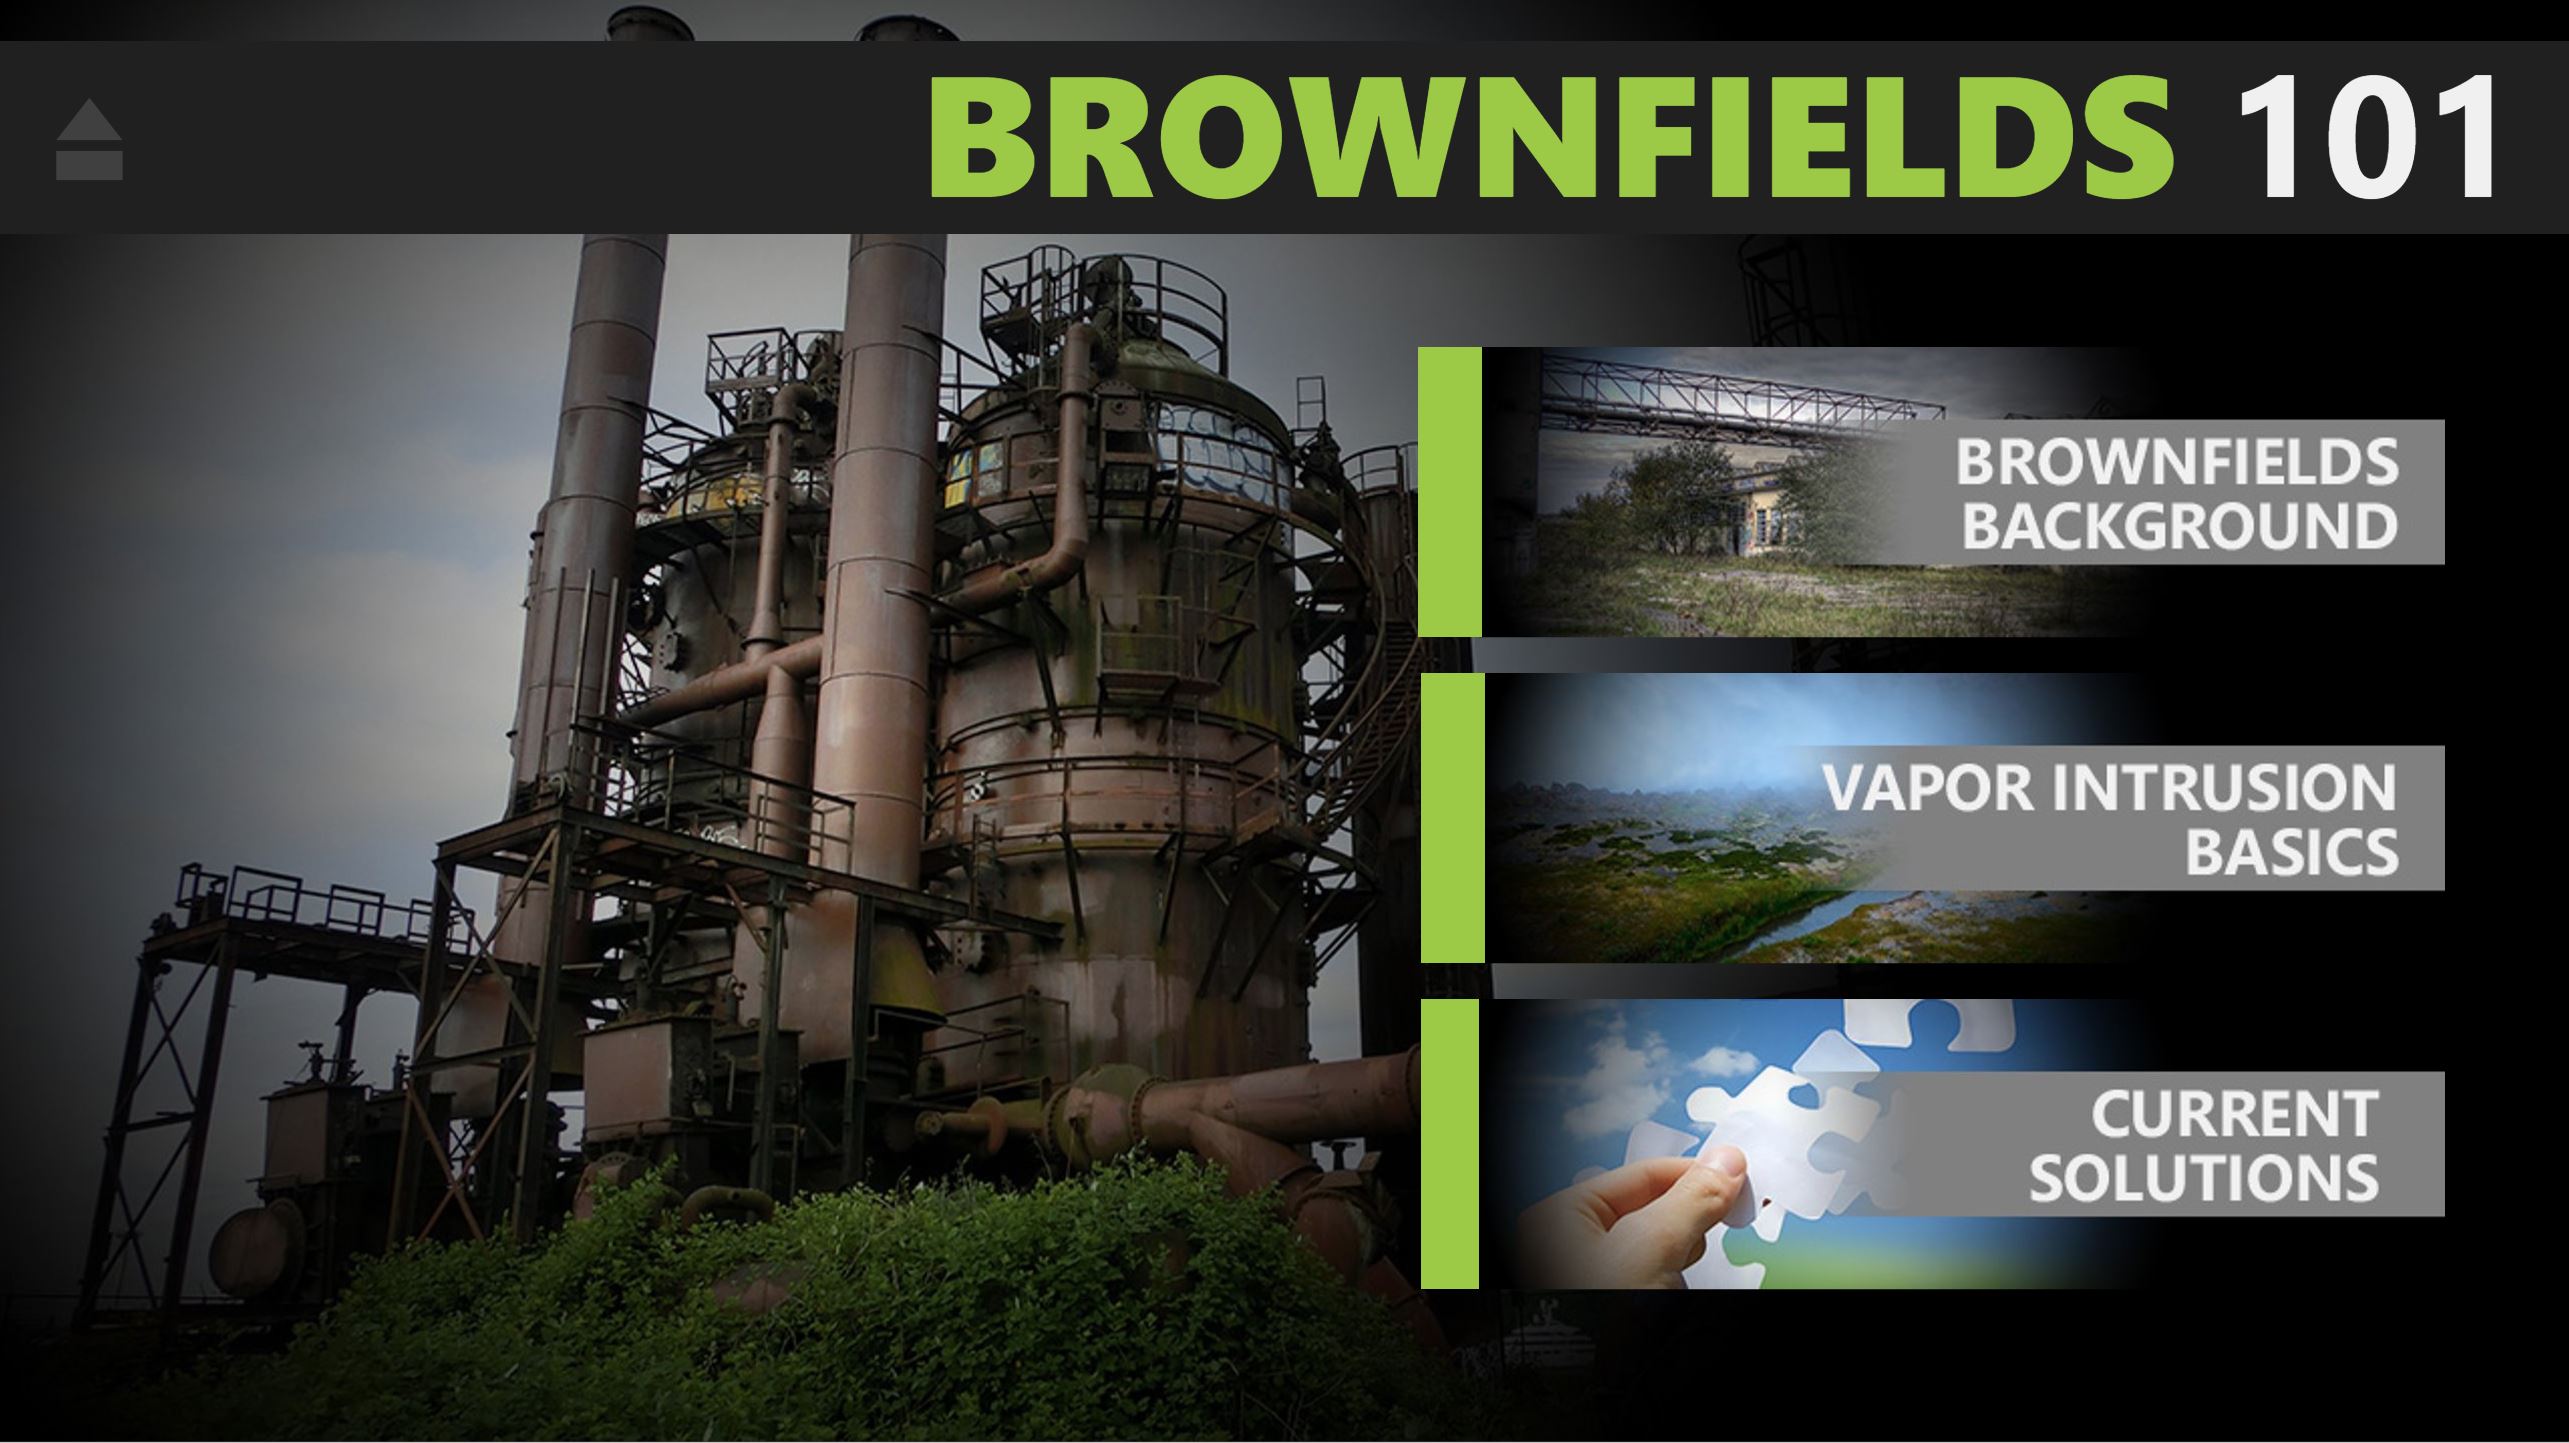 Brownfields 101 Overview